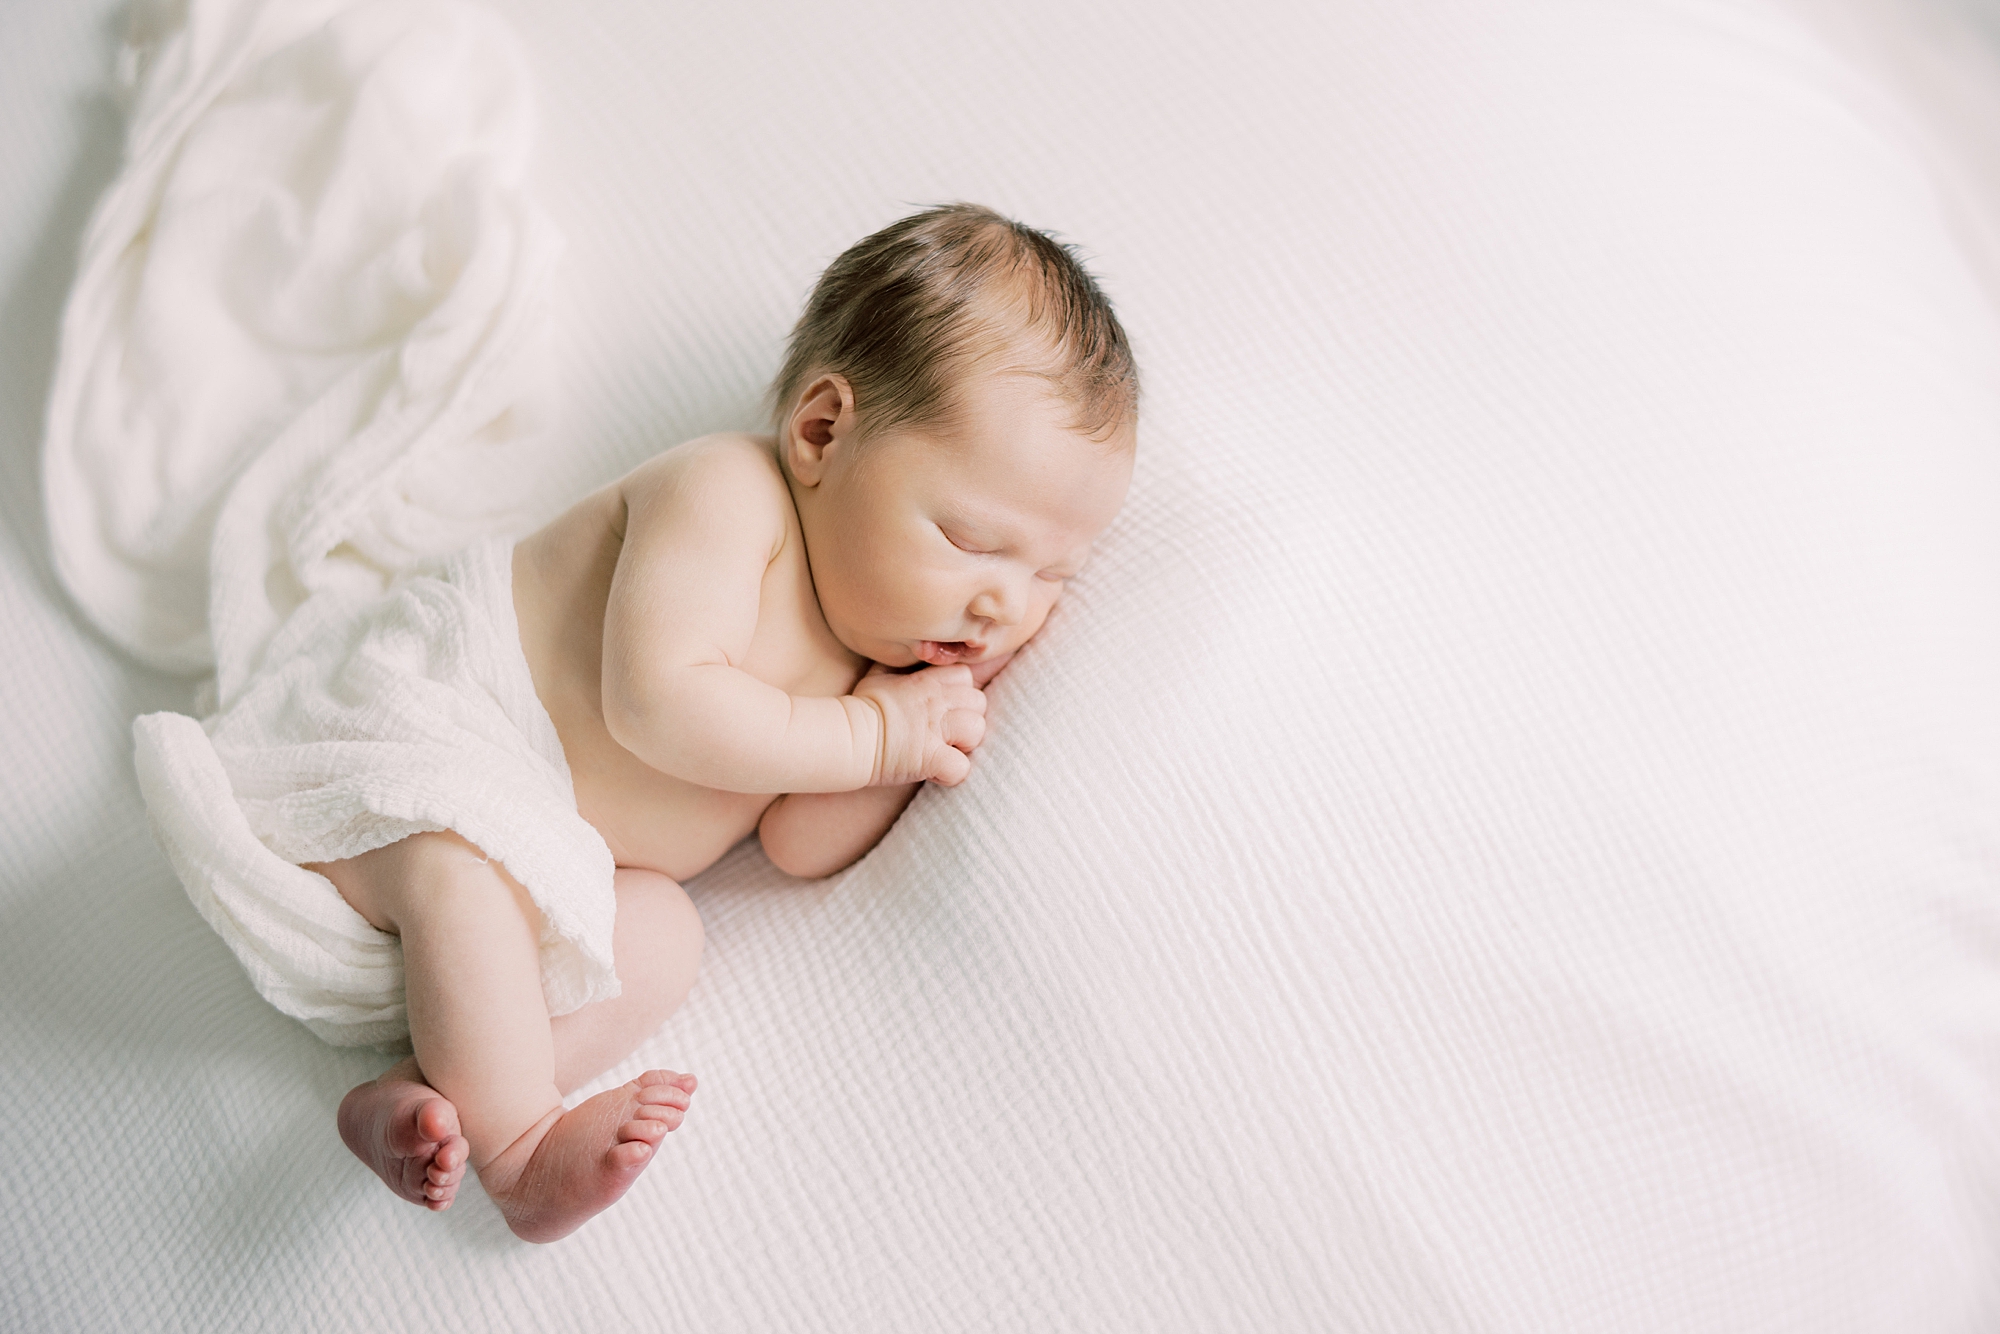 baby lays in white wrap during newborn photos on blanket 